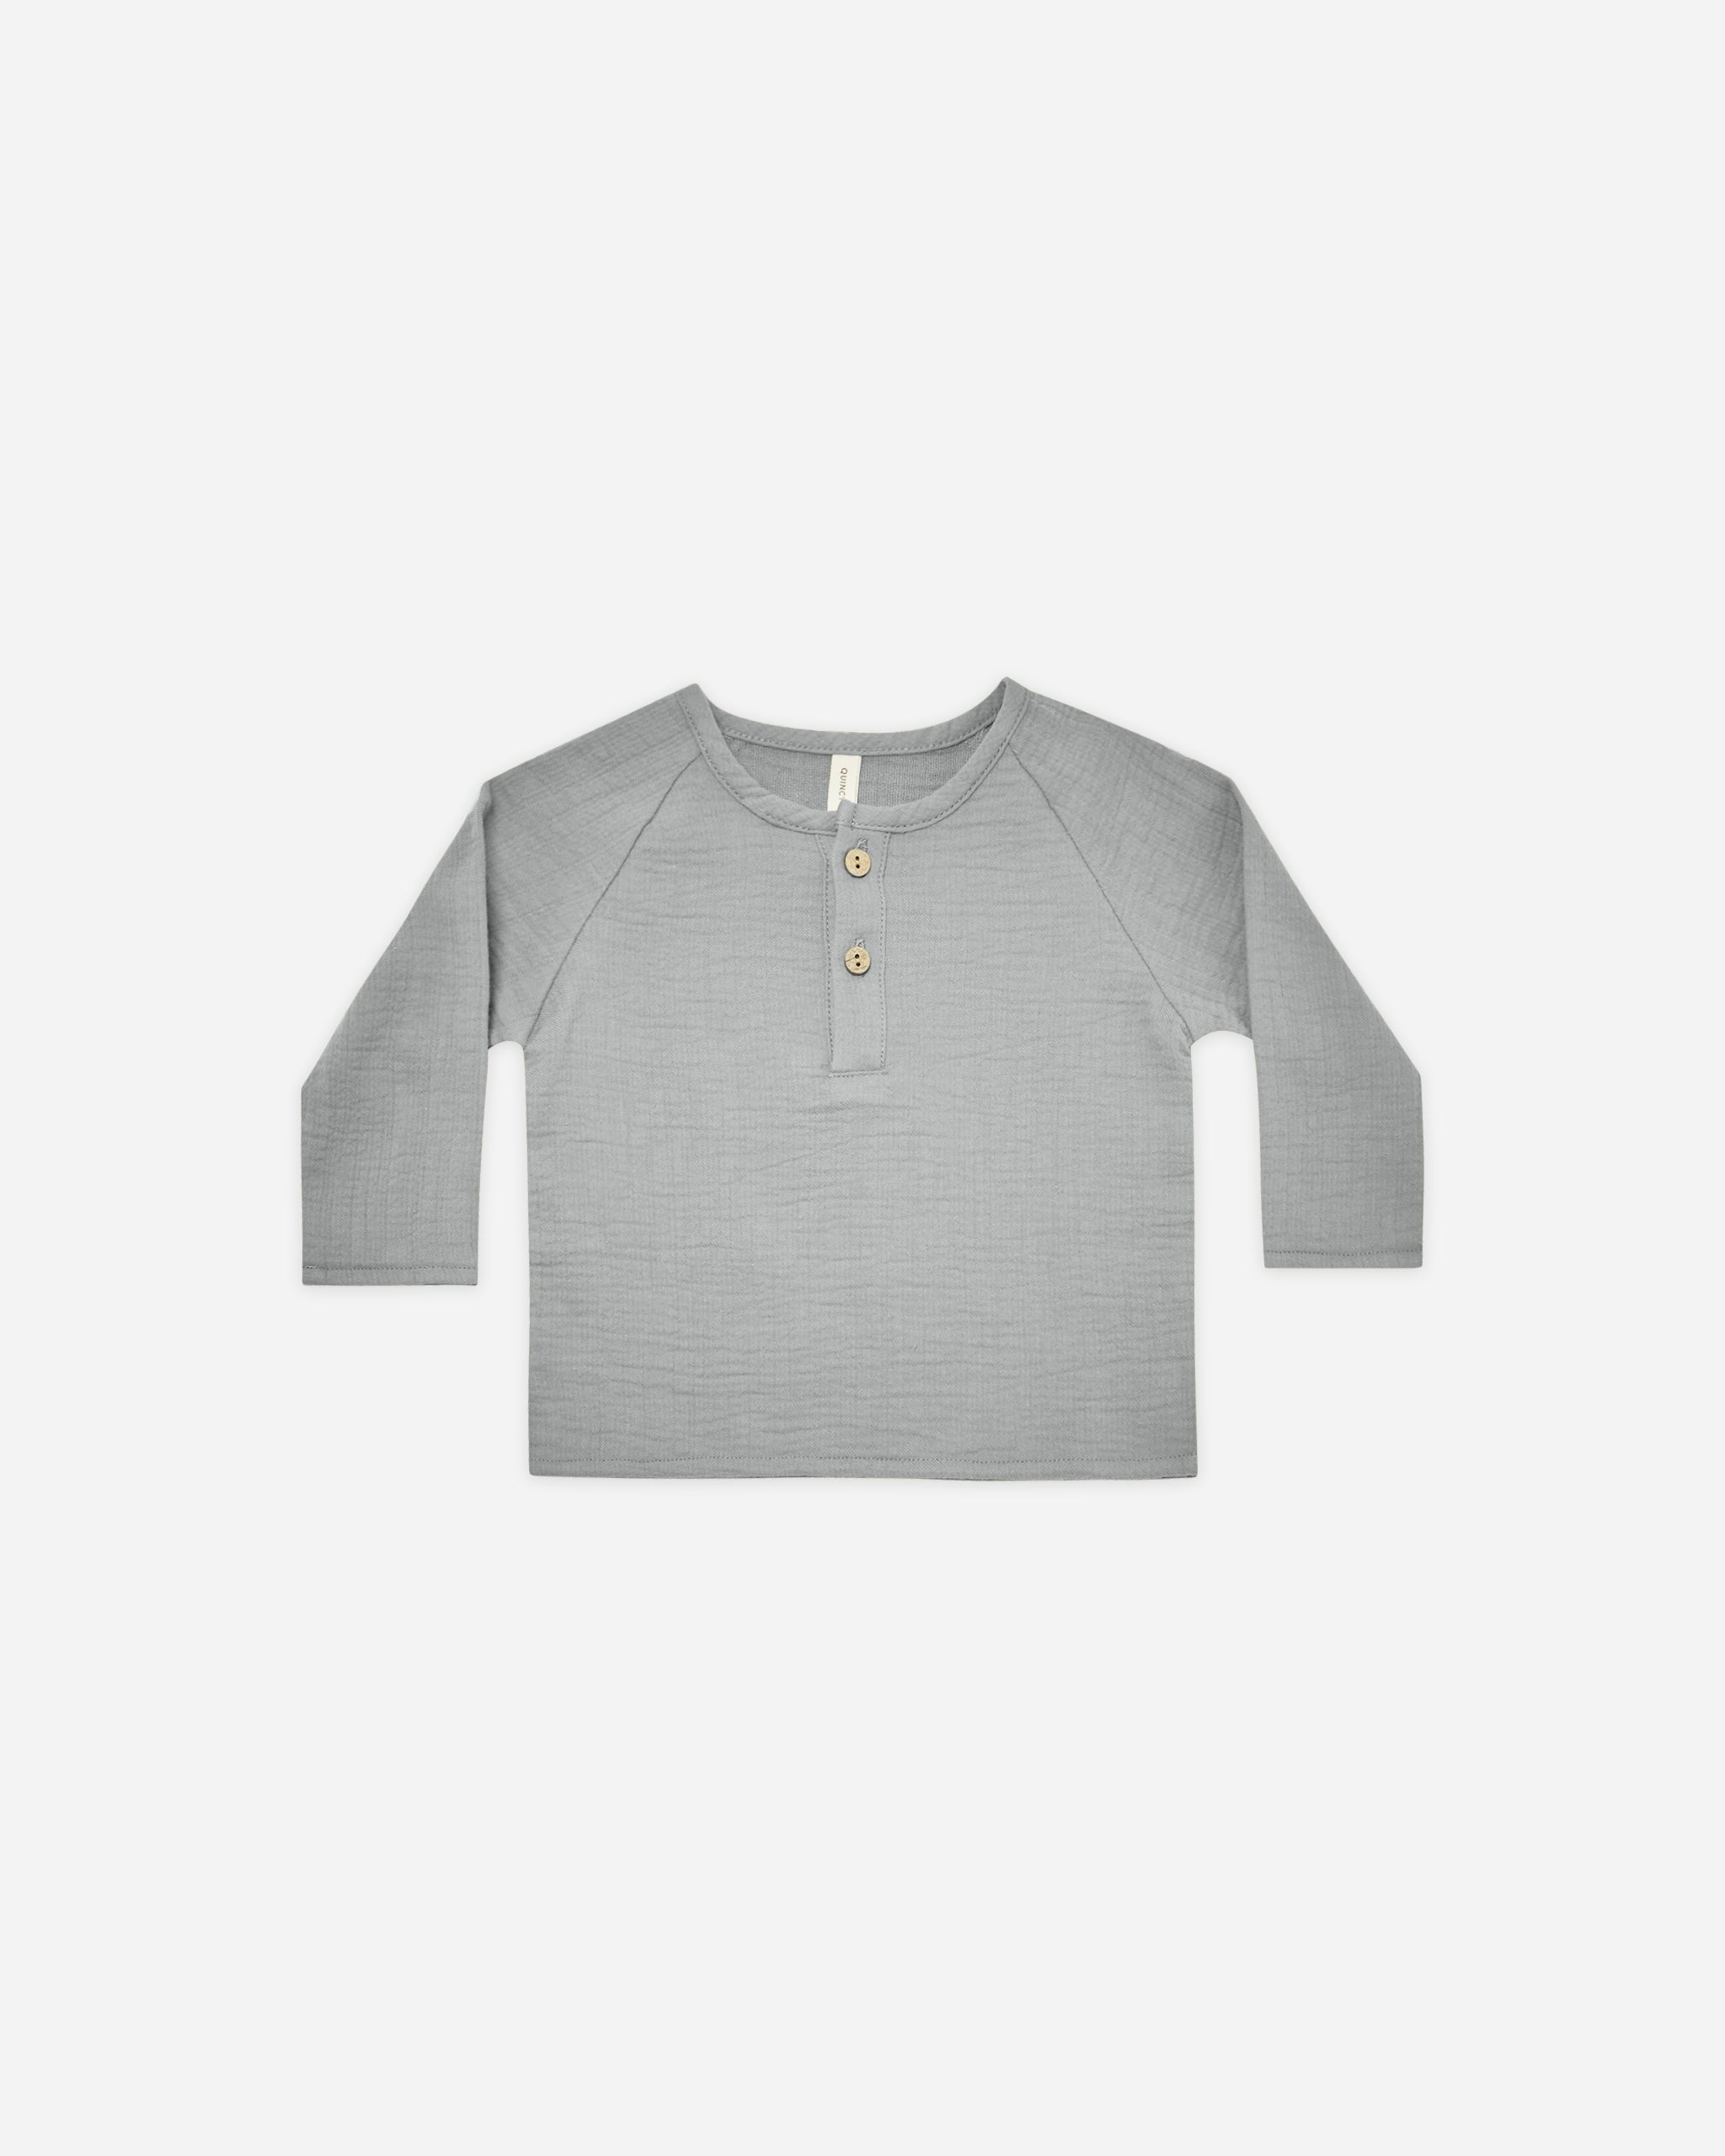 Zion Shirt || Dusty Blue - Rylee + Cru | Kids Clothes | Trendy Baby Clothes | Modern Infant Outfits |